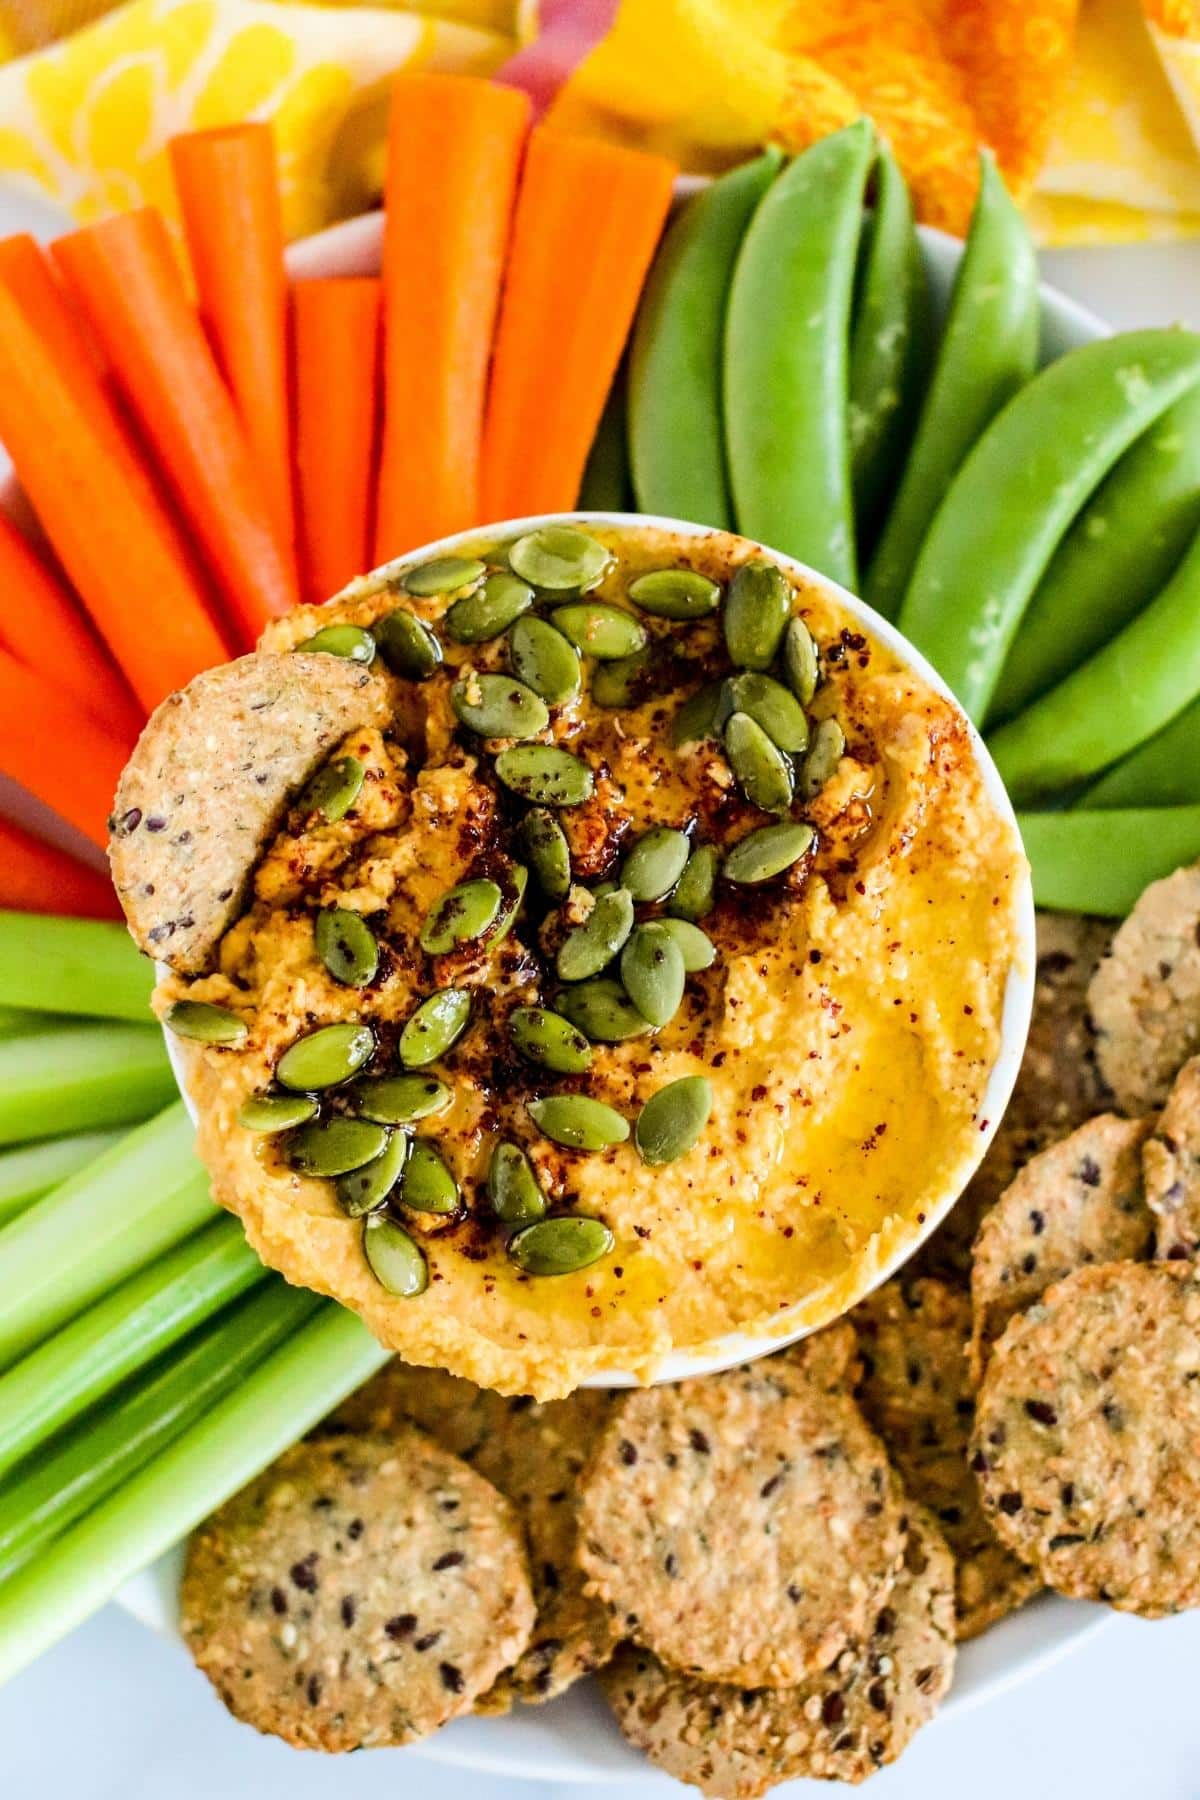 Bowl of pumpkin hummus garnished with pumpkin seeds and spices on a platter of celery, carrots, sugar snap peas, and crackers.